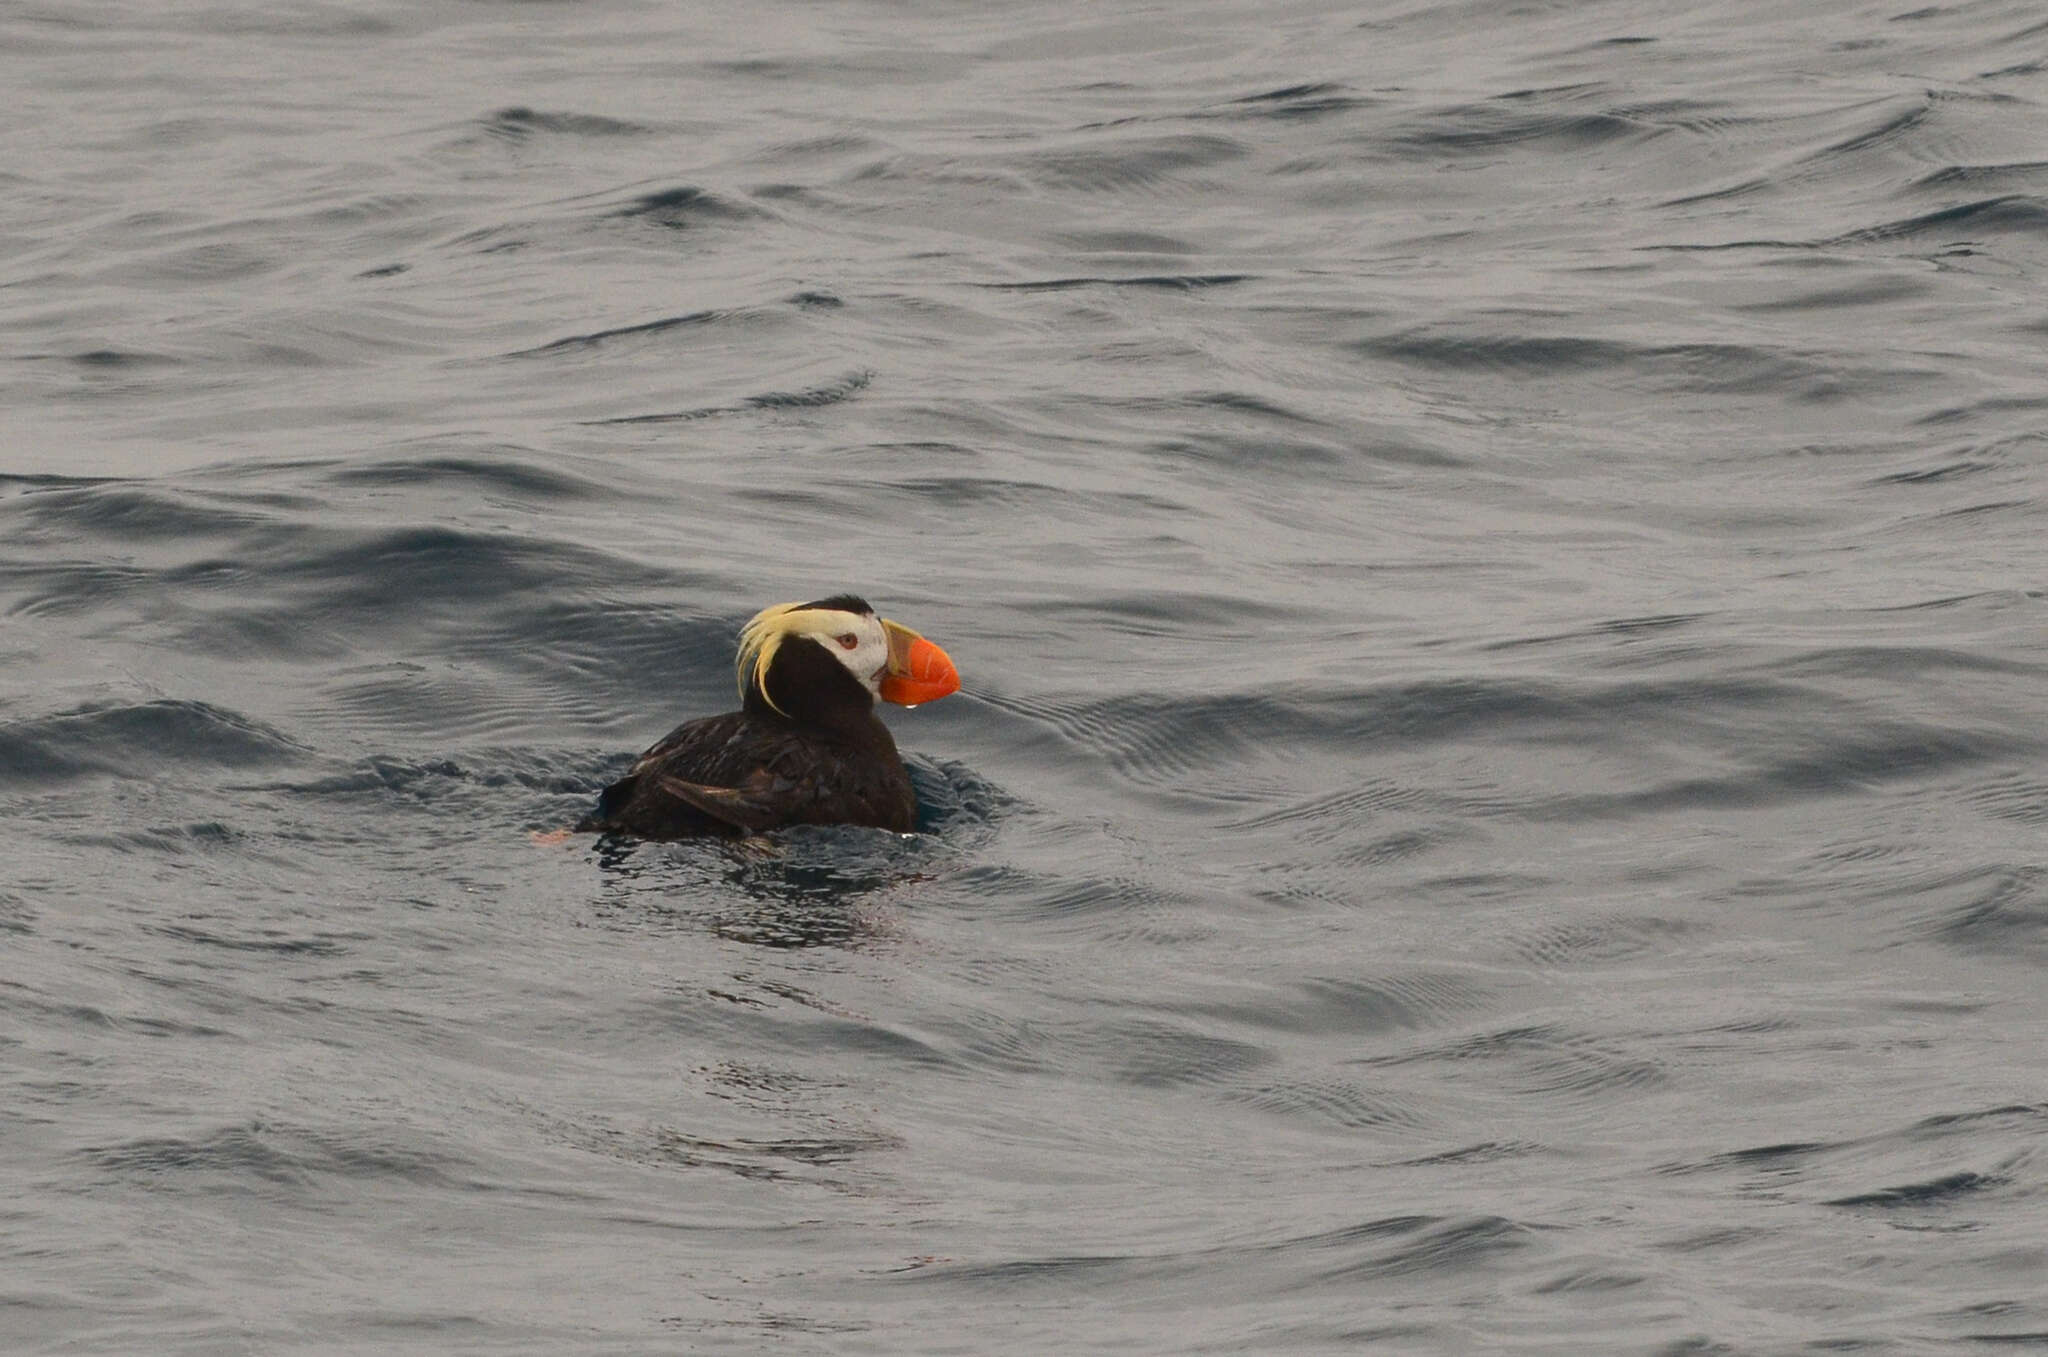 Image of Tufted Puffin